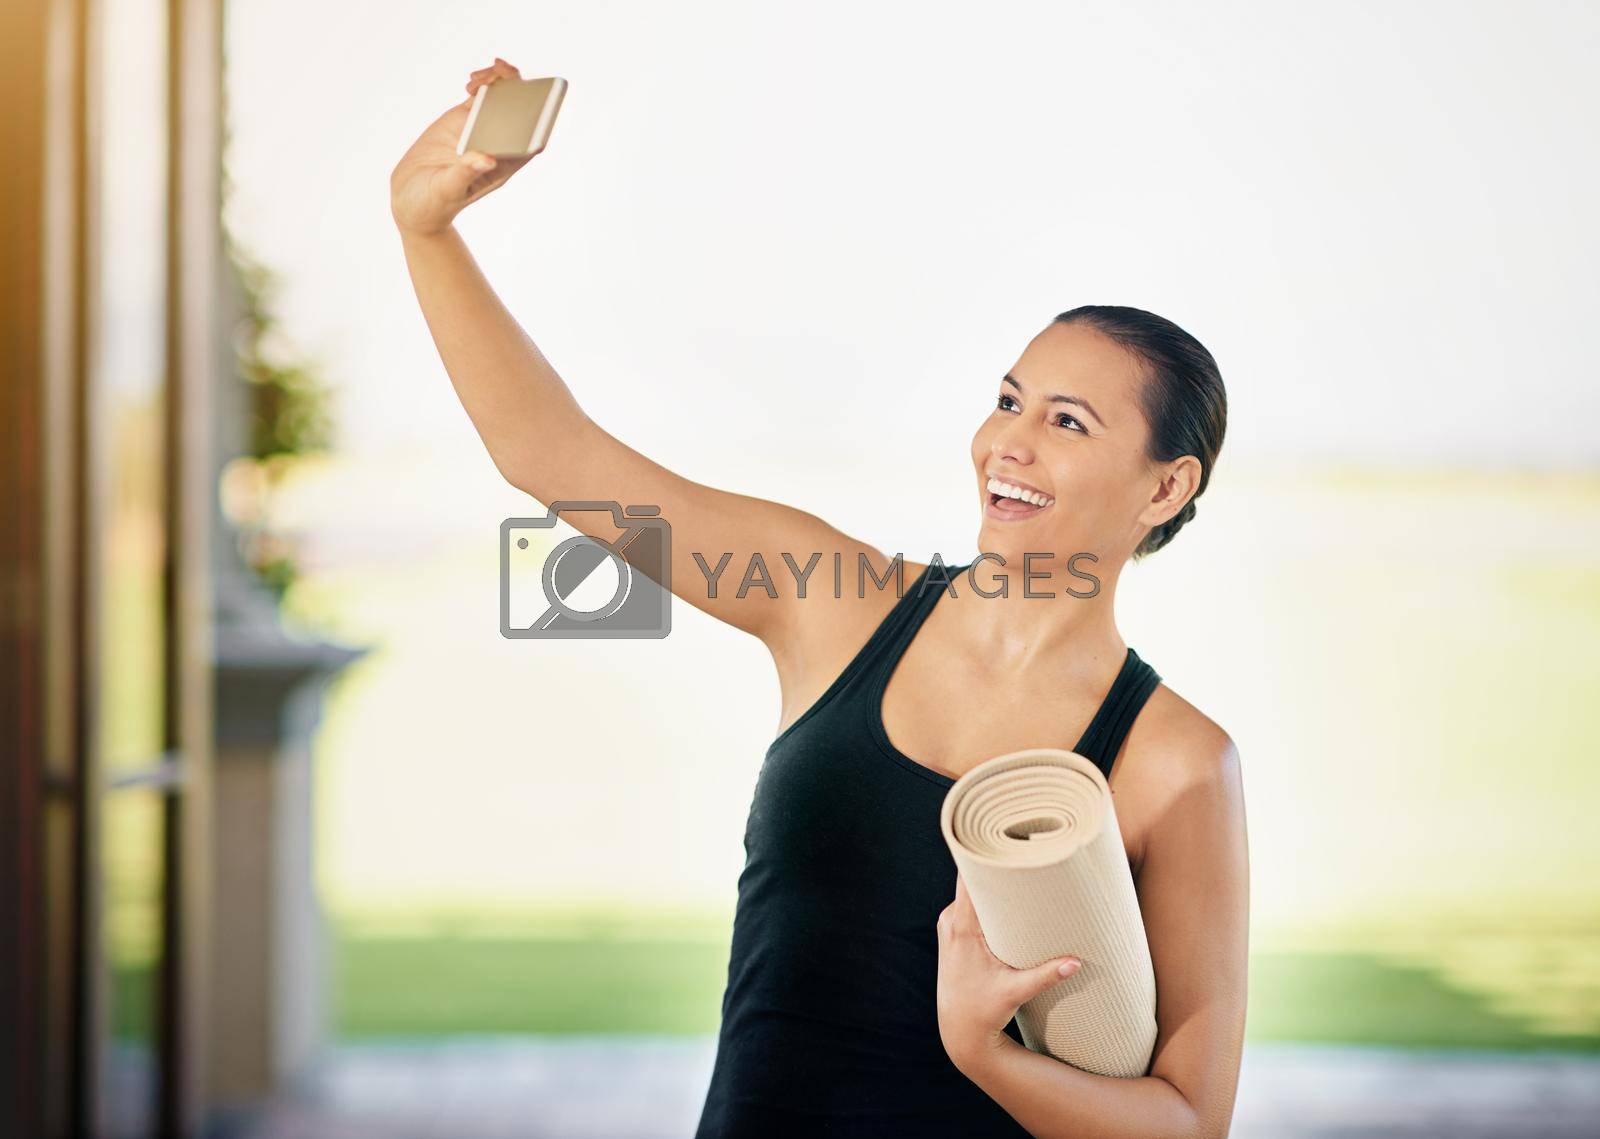 Royalty free image of Yoga selfie. a young woman taking a selfie while carrying her yoga mat. by YuriArcurs